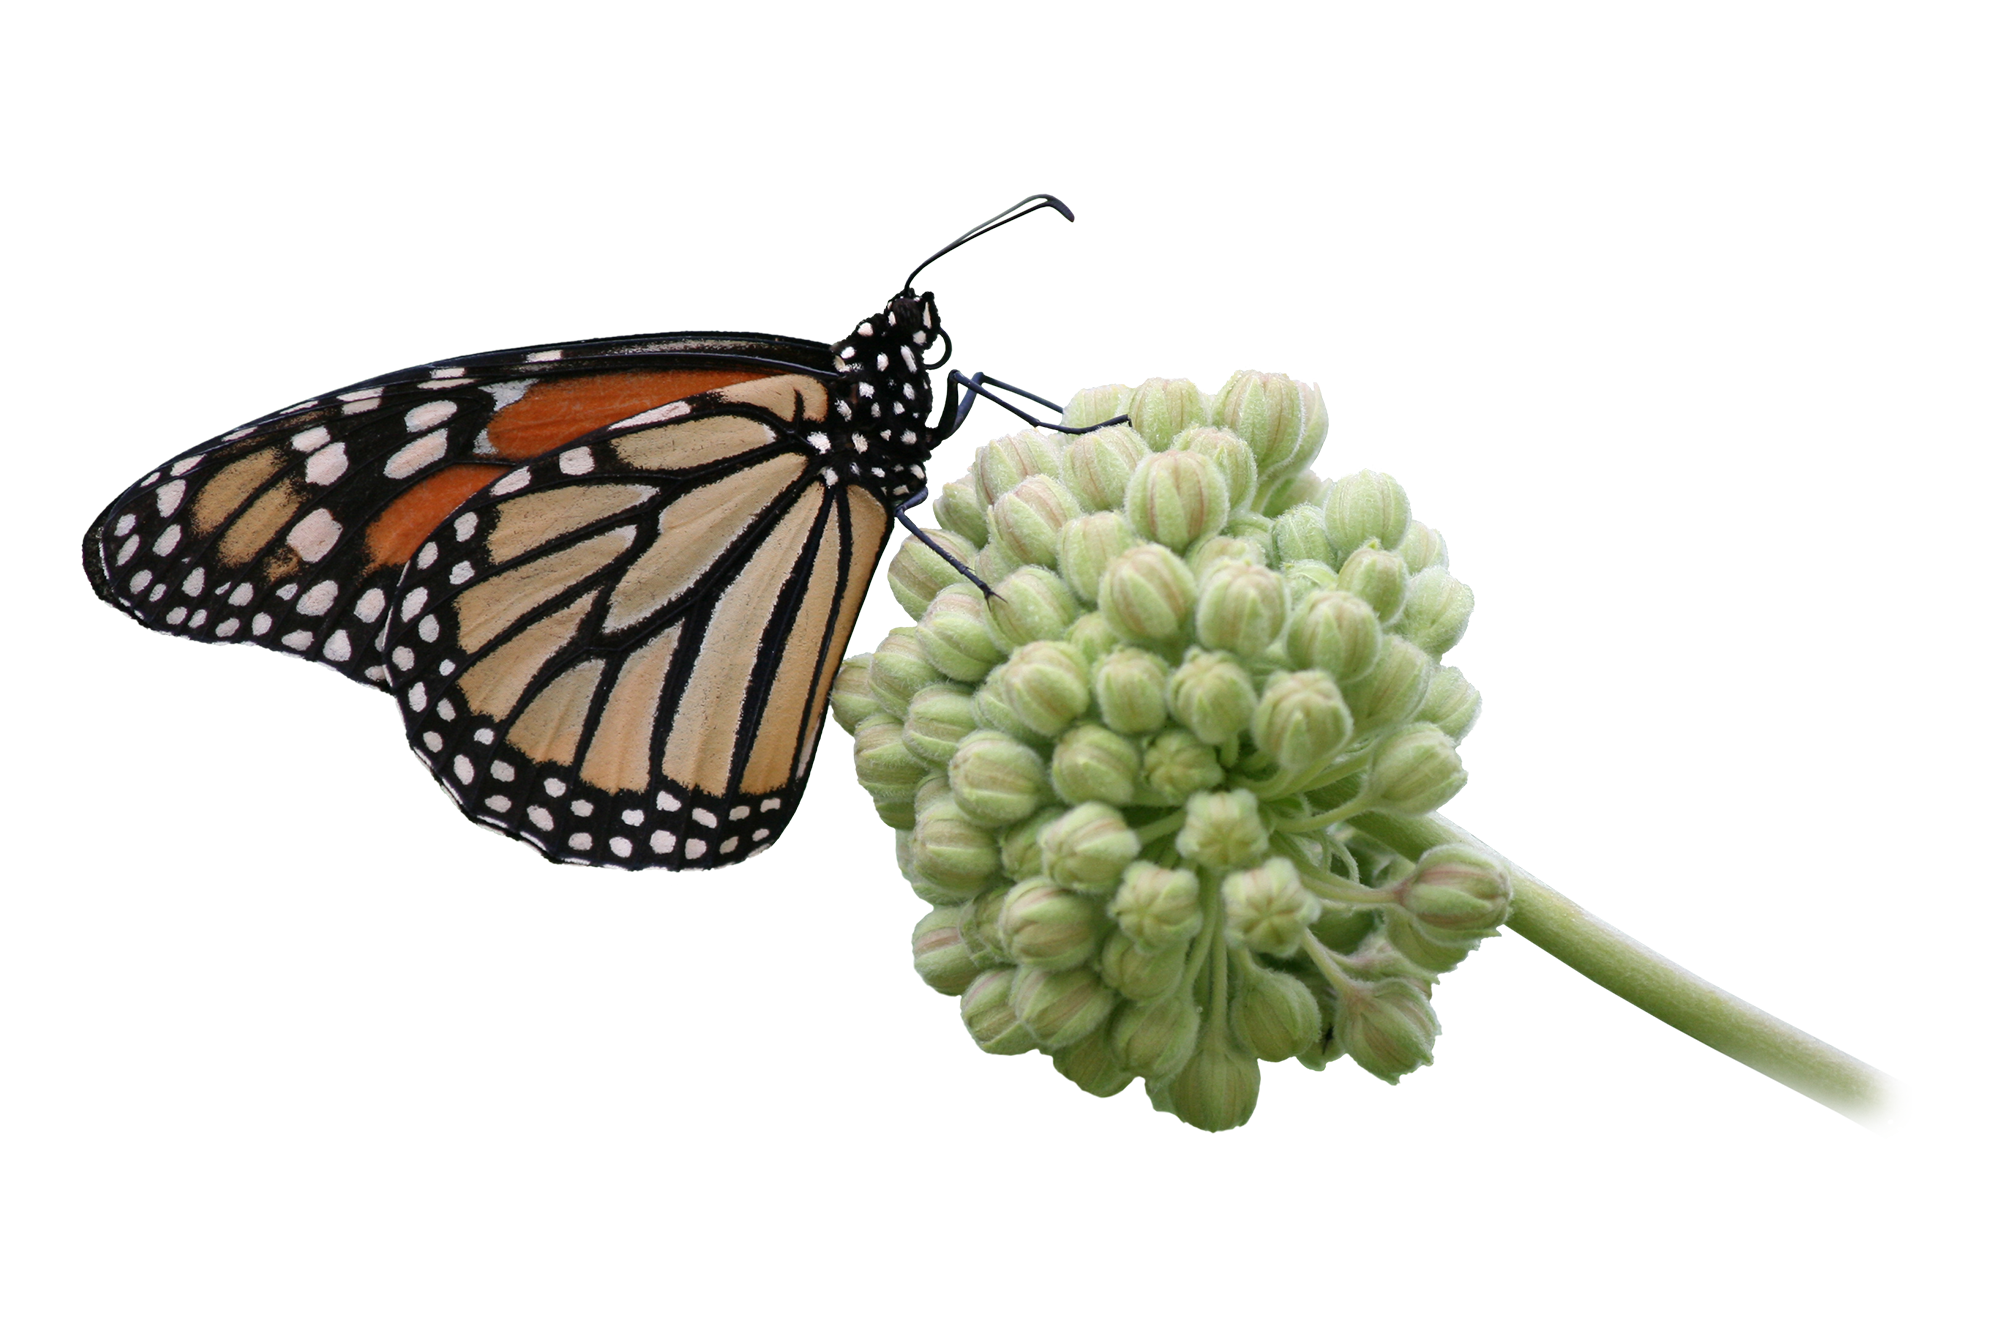 A monarch butterfly perched on a cluster of milkweed flowers.